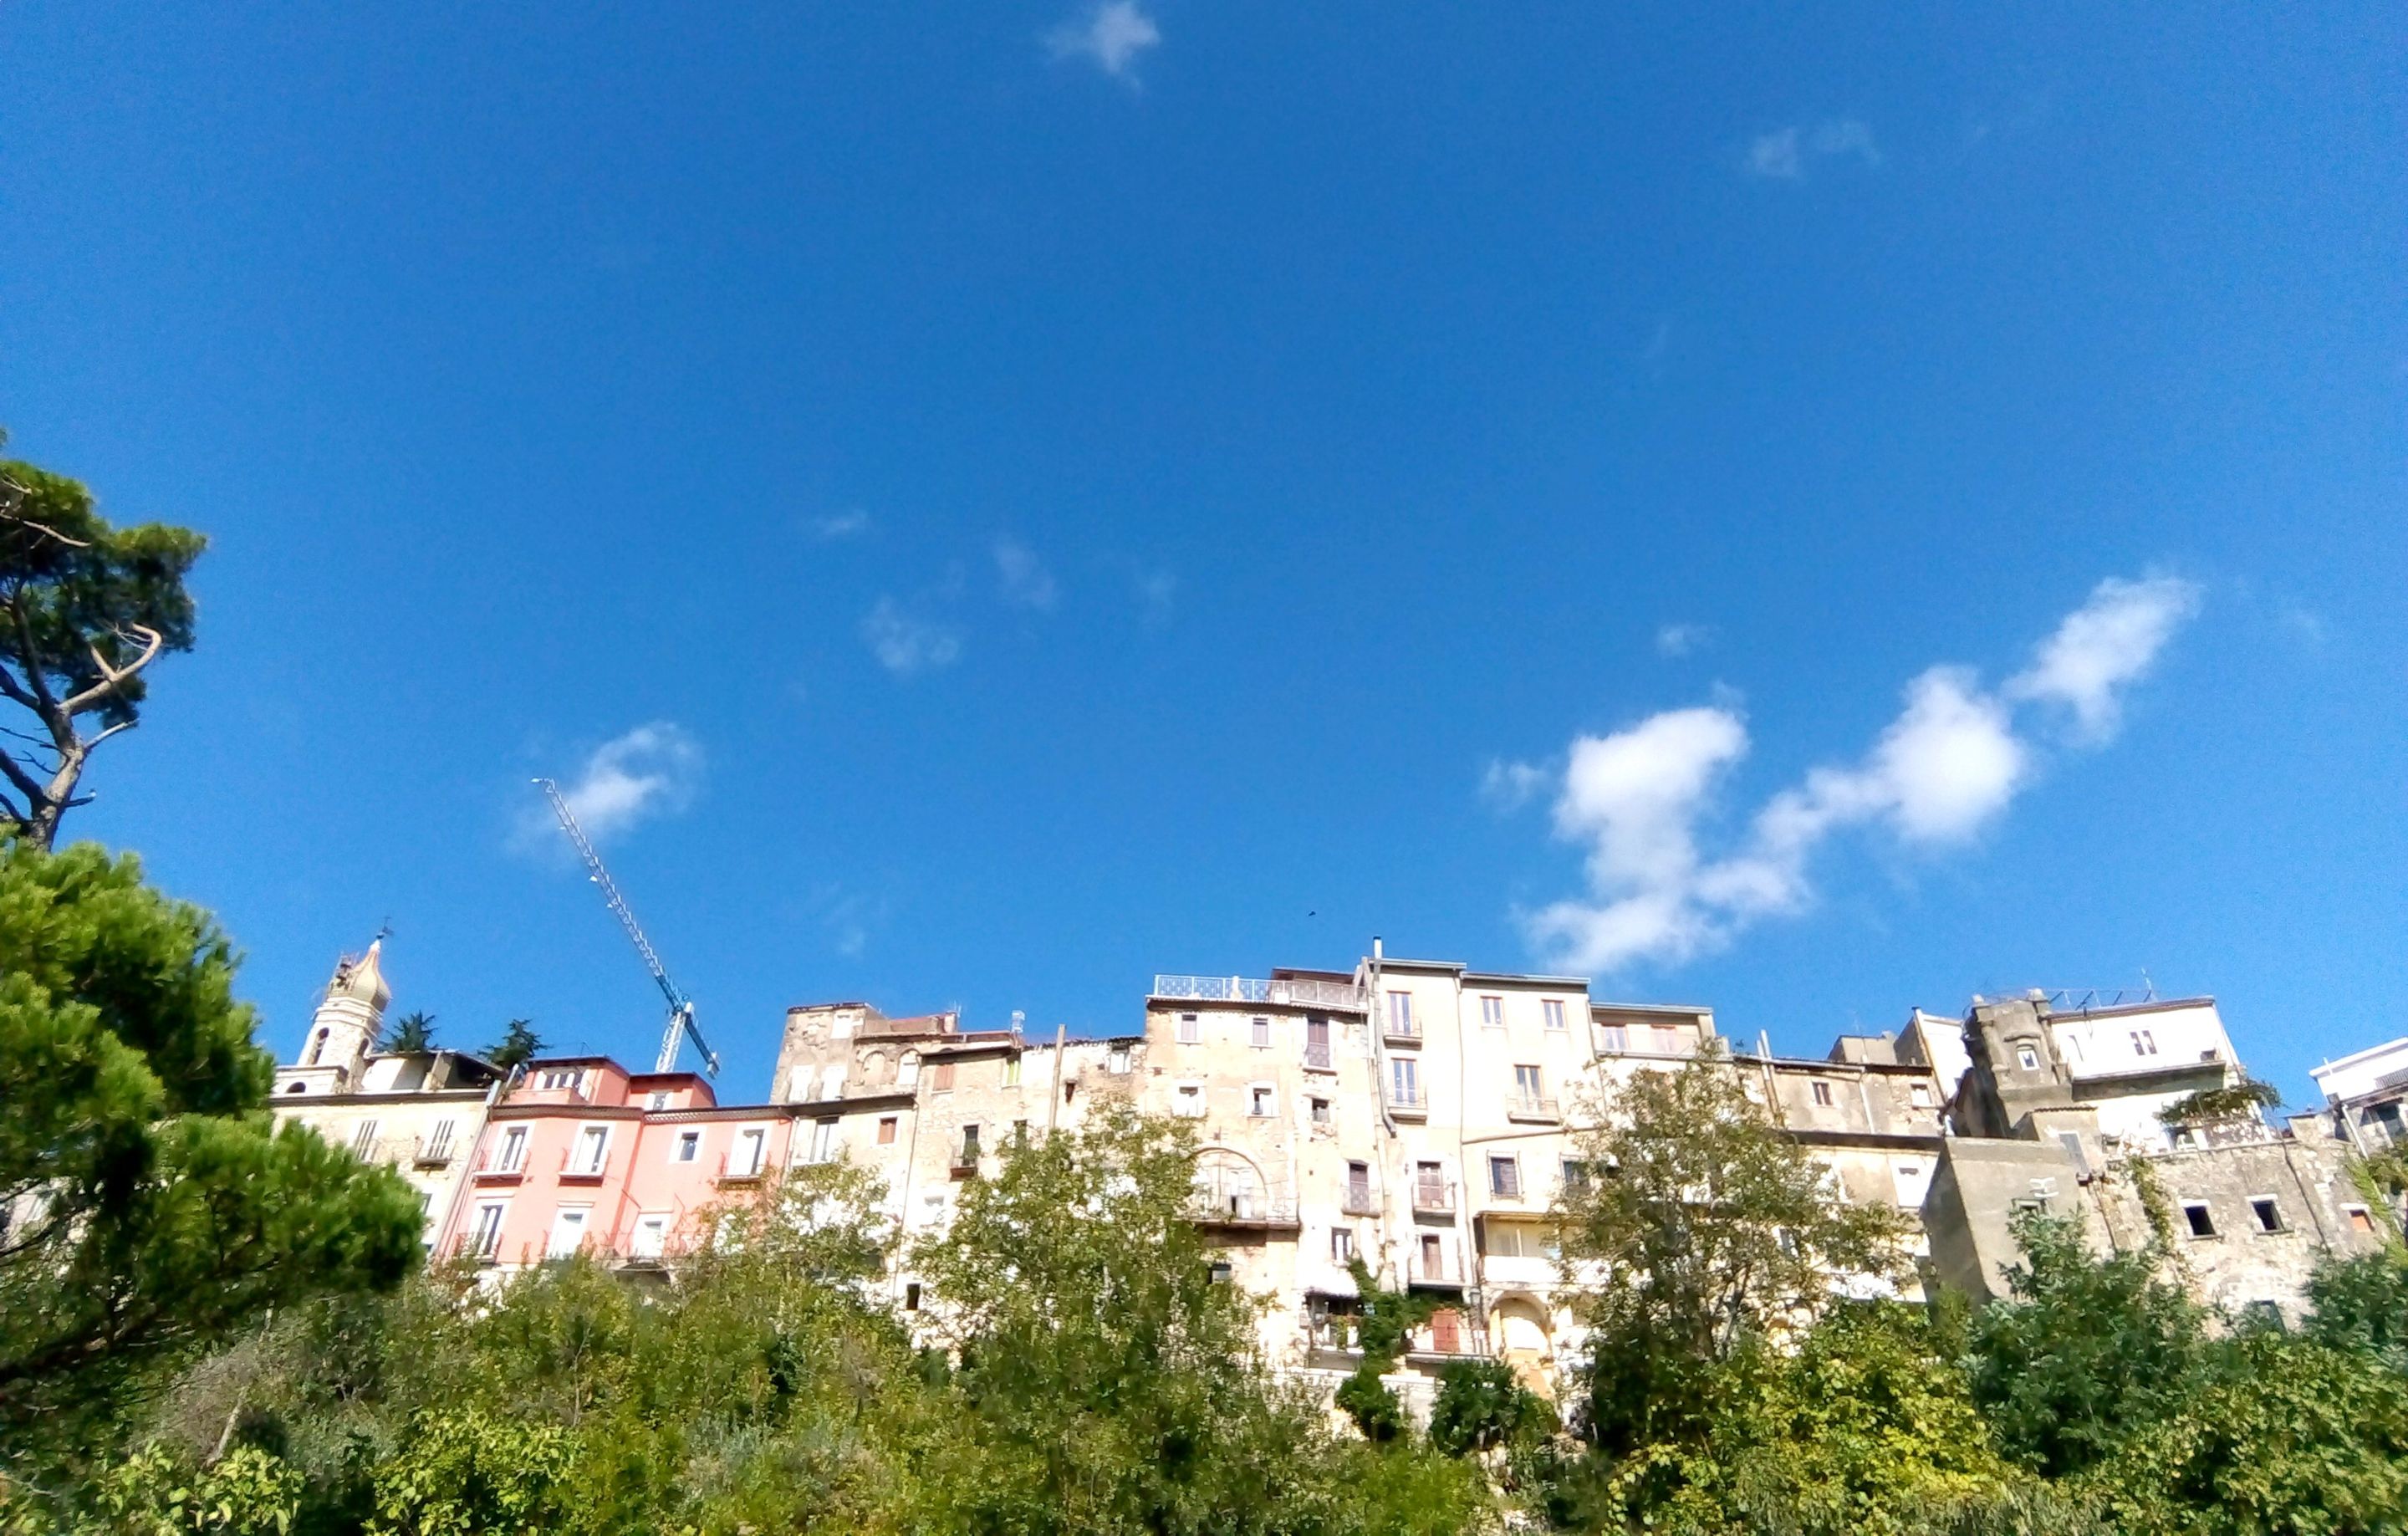 36 view from below the gardens - up to the facade of the old town - Arthouse to right.jpg